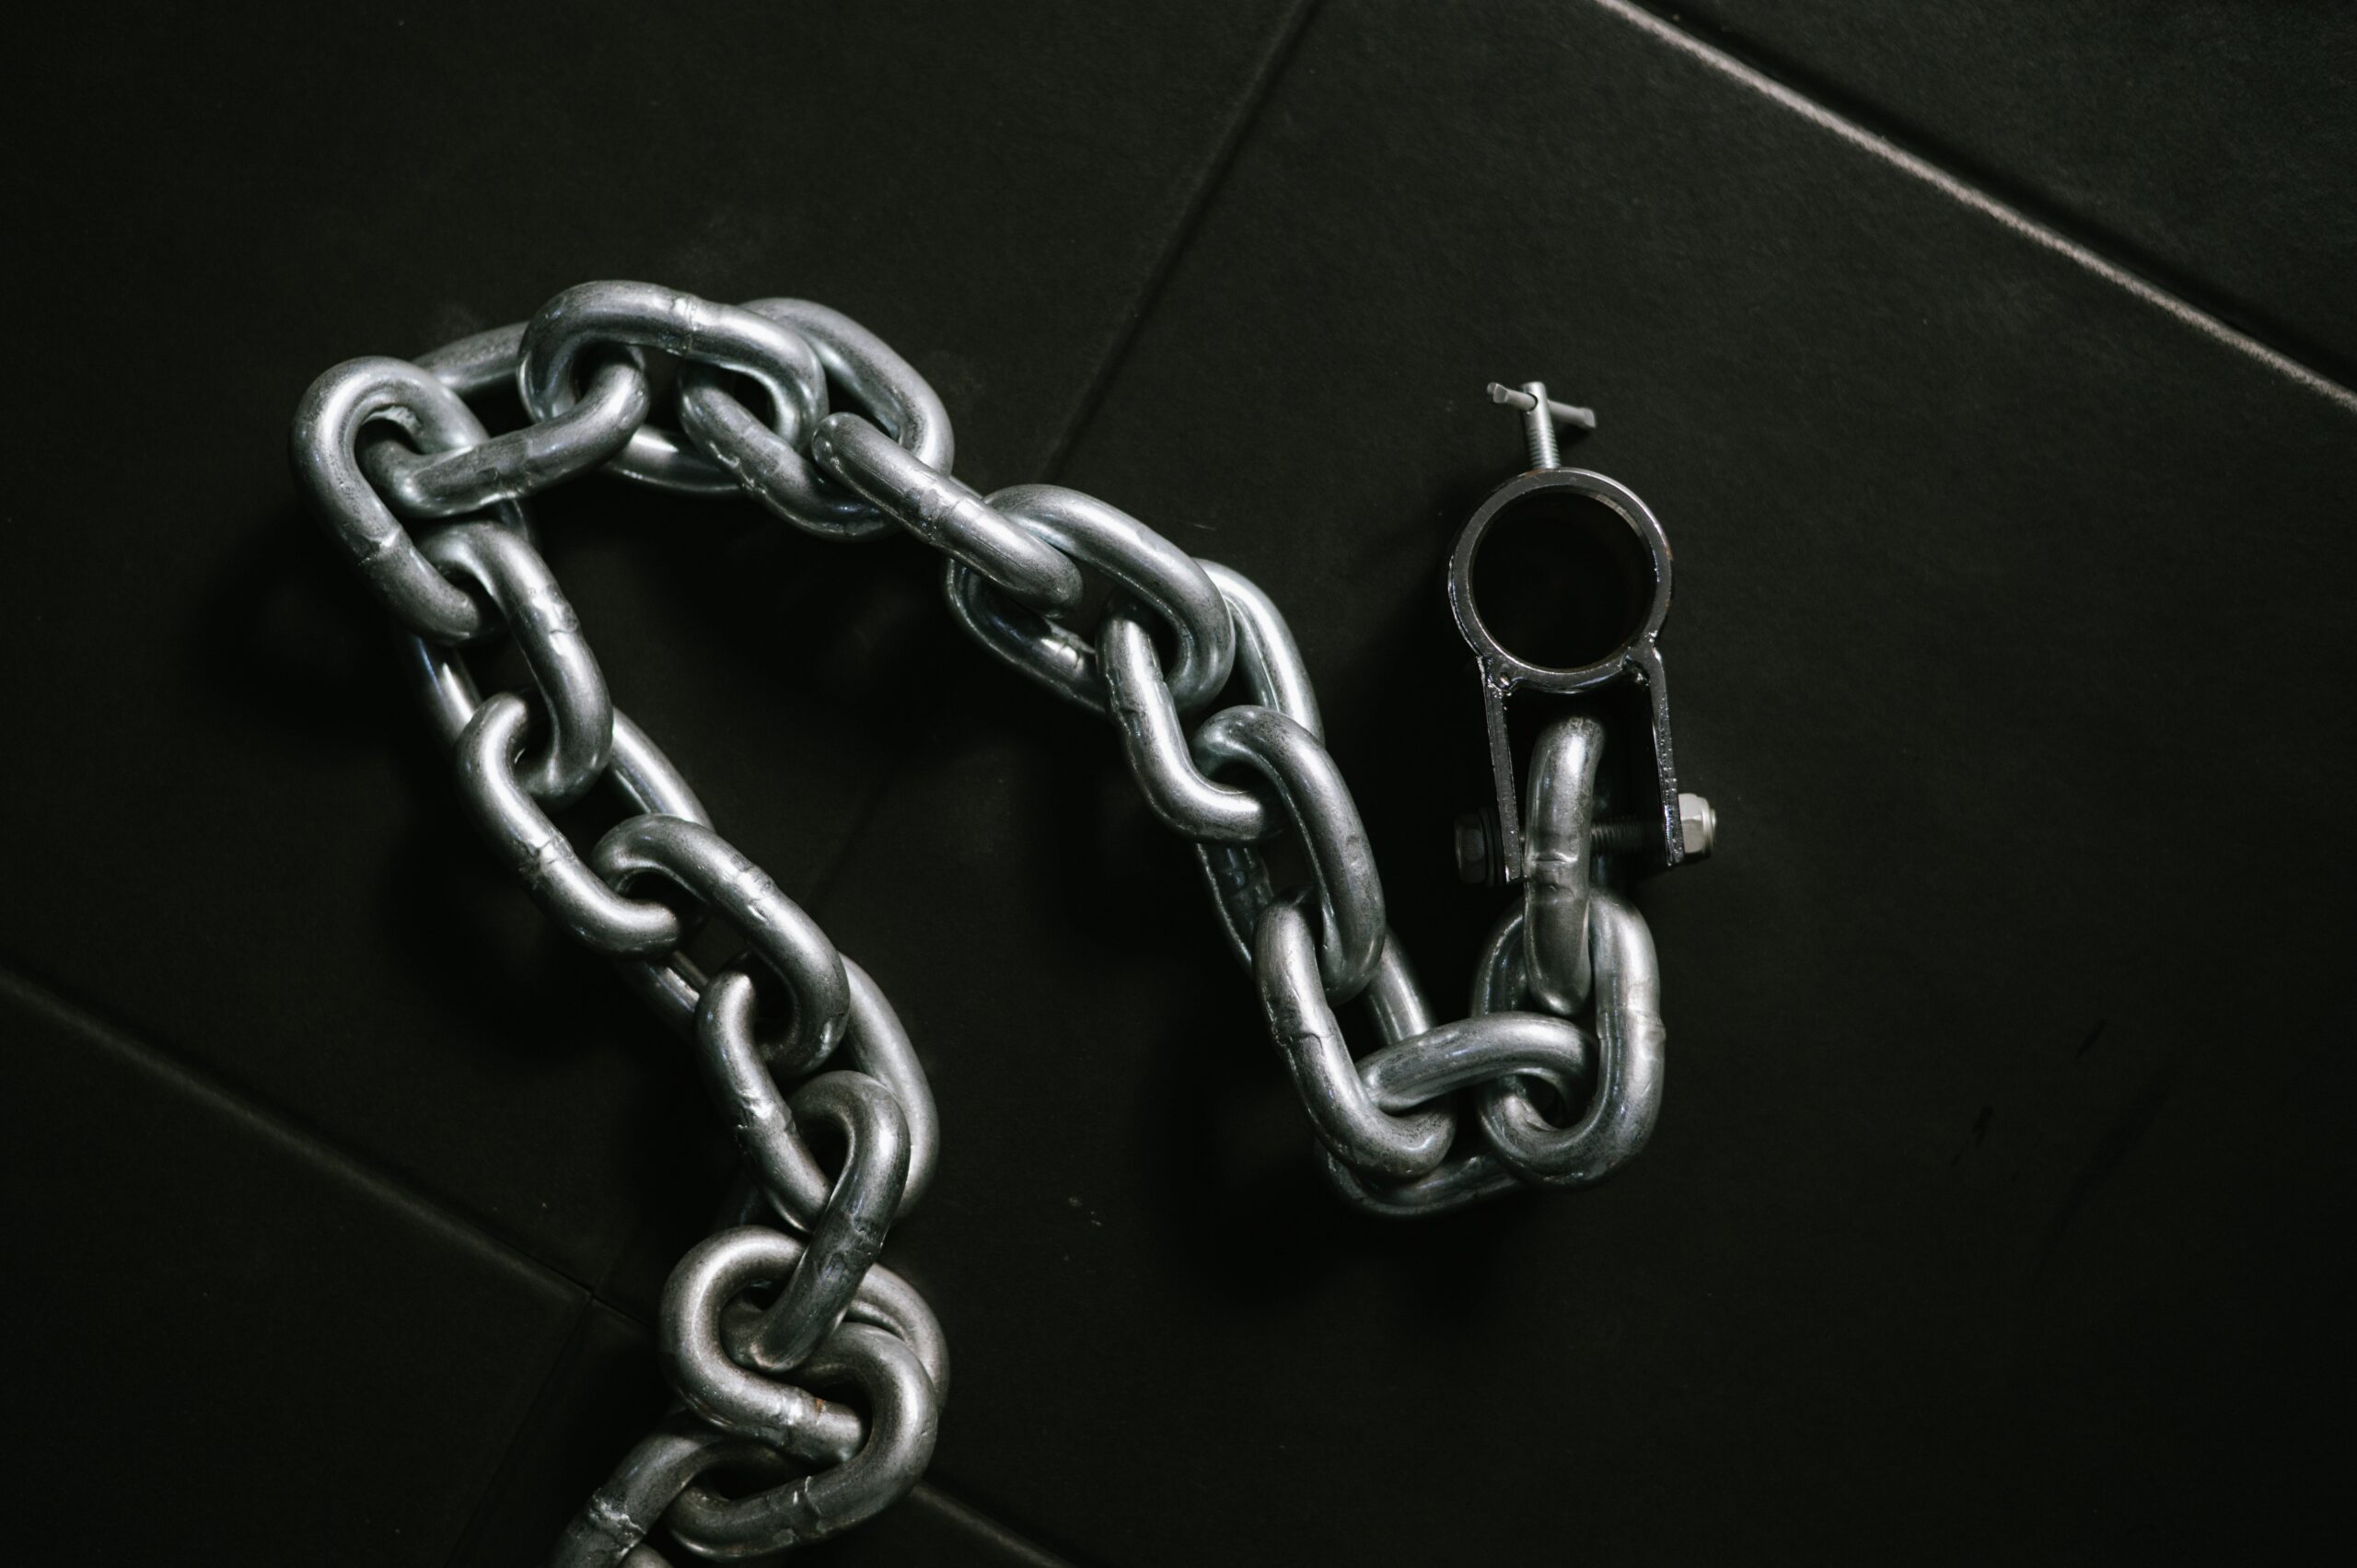 Metal chain representing the charge of criminal harassment and how to defend oneself.